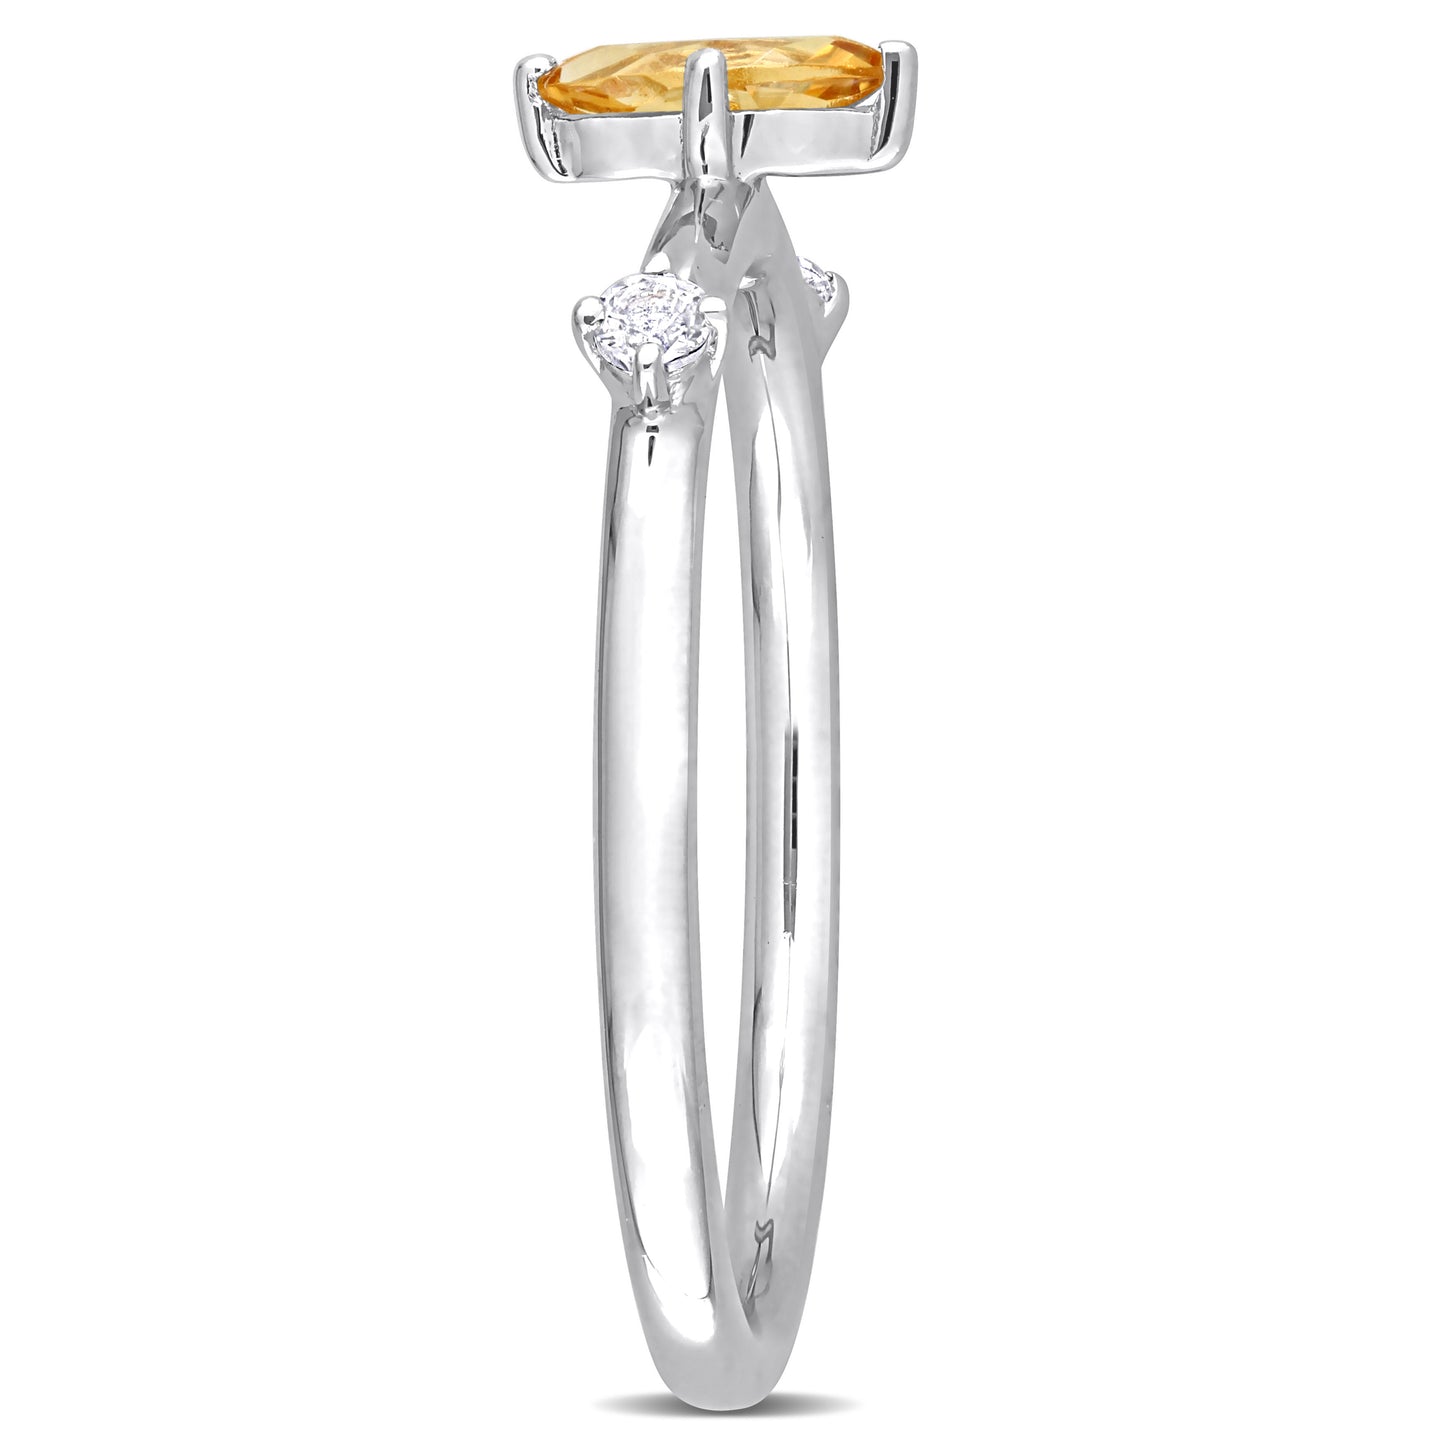 Marquise Cut Citrine & White Topaz Ring in Sterling Silver